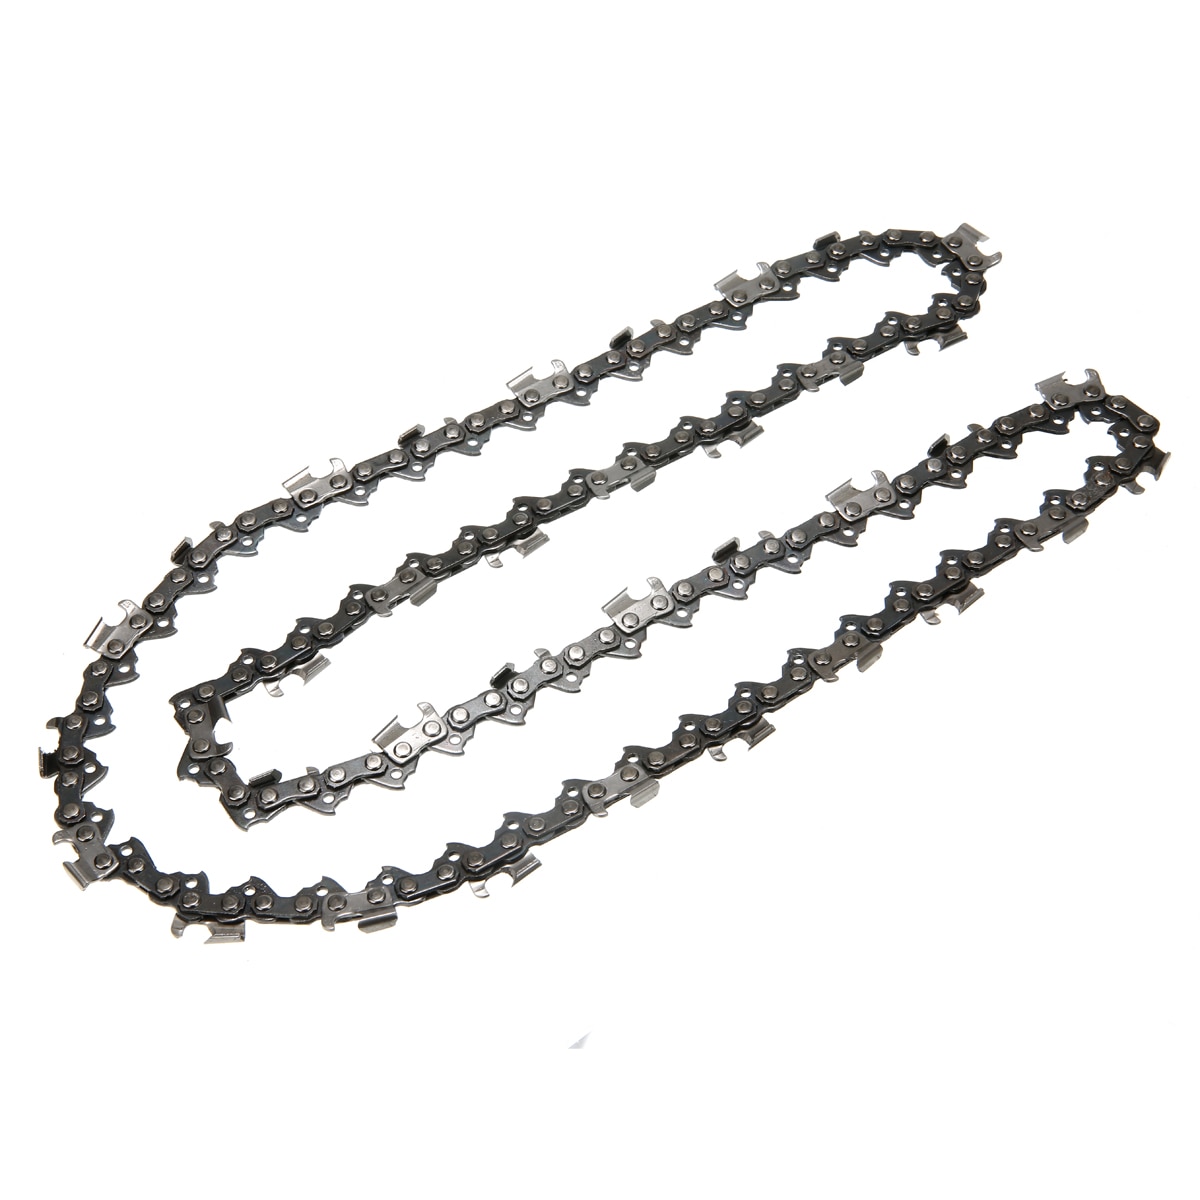 2pcs 18 inch Chainsaw Saw Chain Blade Pitch .325 " 0.058 Gauge 72DL Replacement Chains Hardware Tools